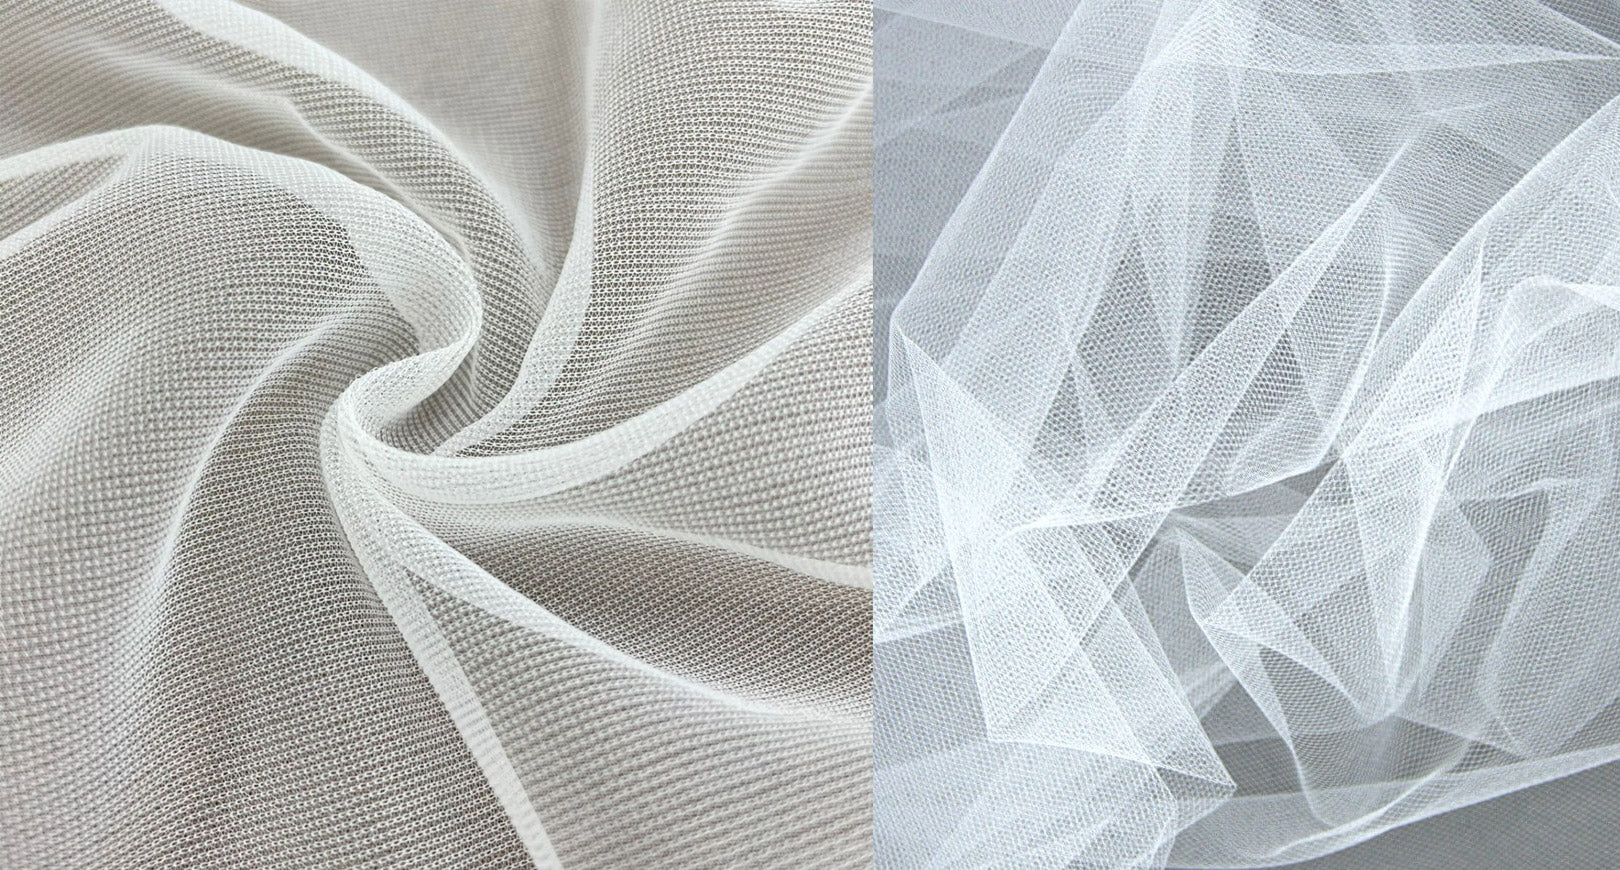 What are the types of tulle fabrics?